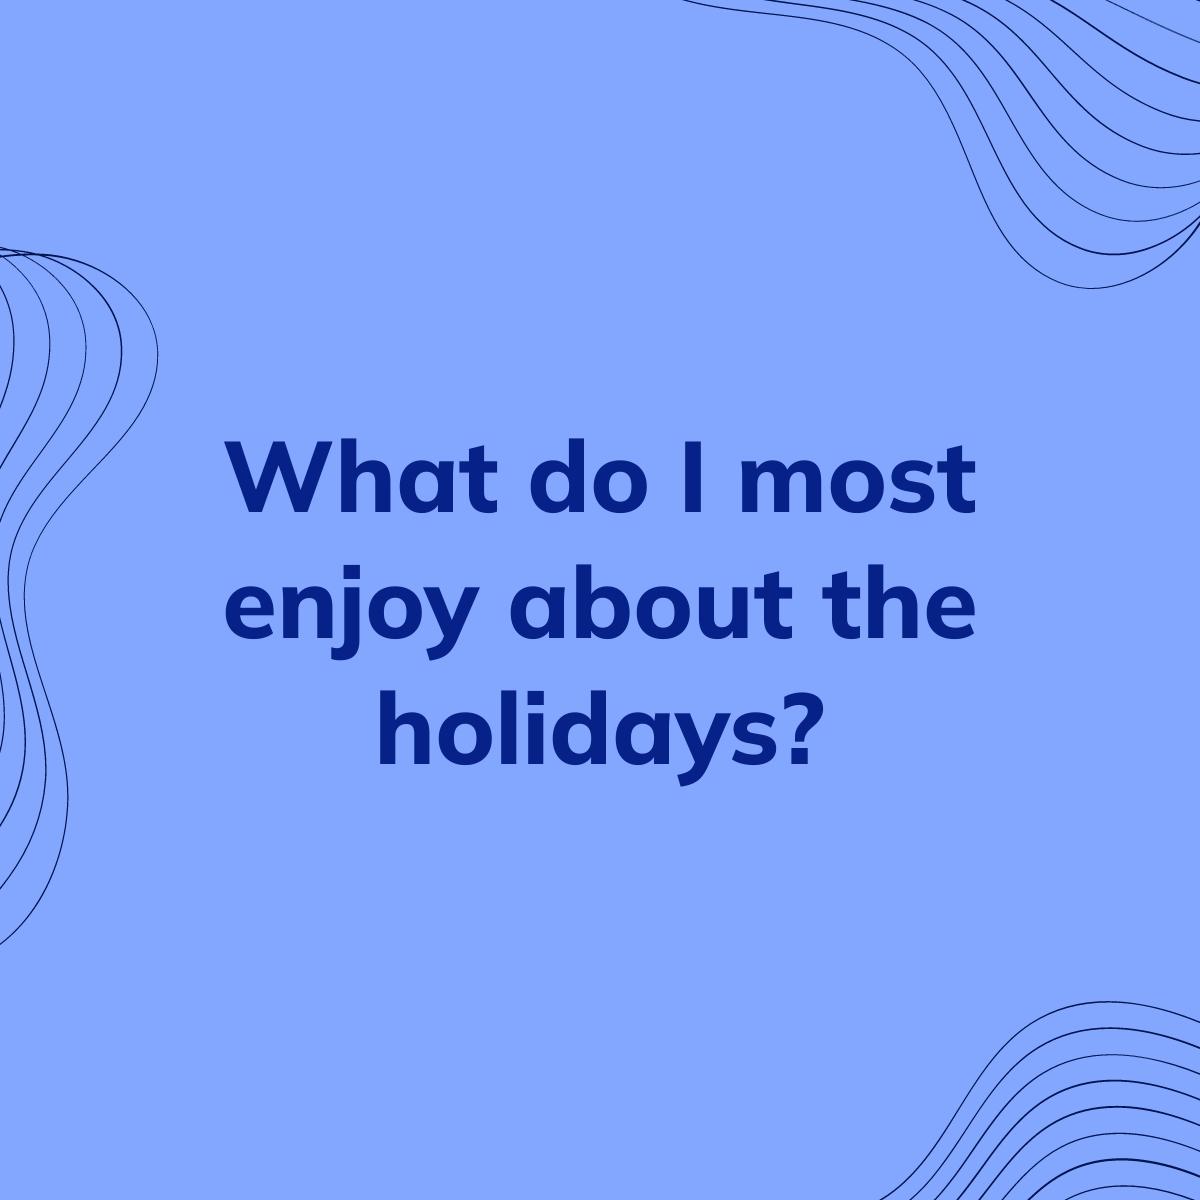 Journal Prompt: What do I most enjoy about the holidays?